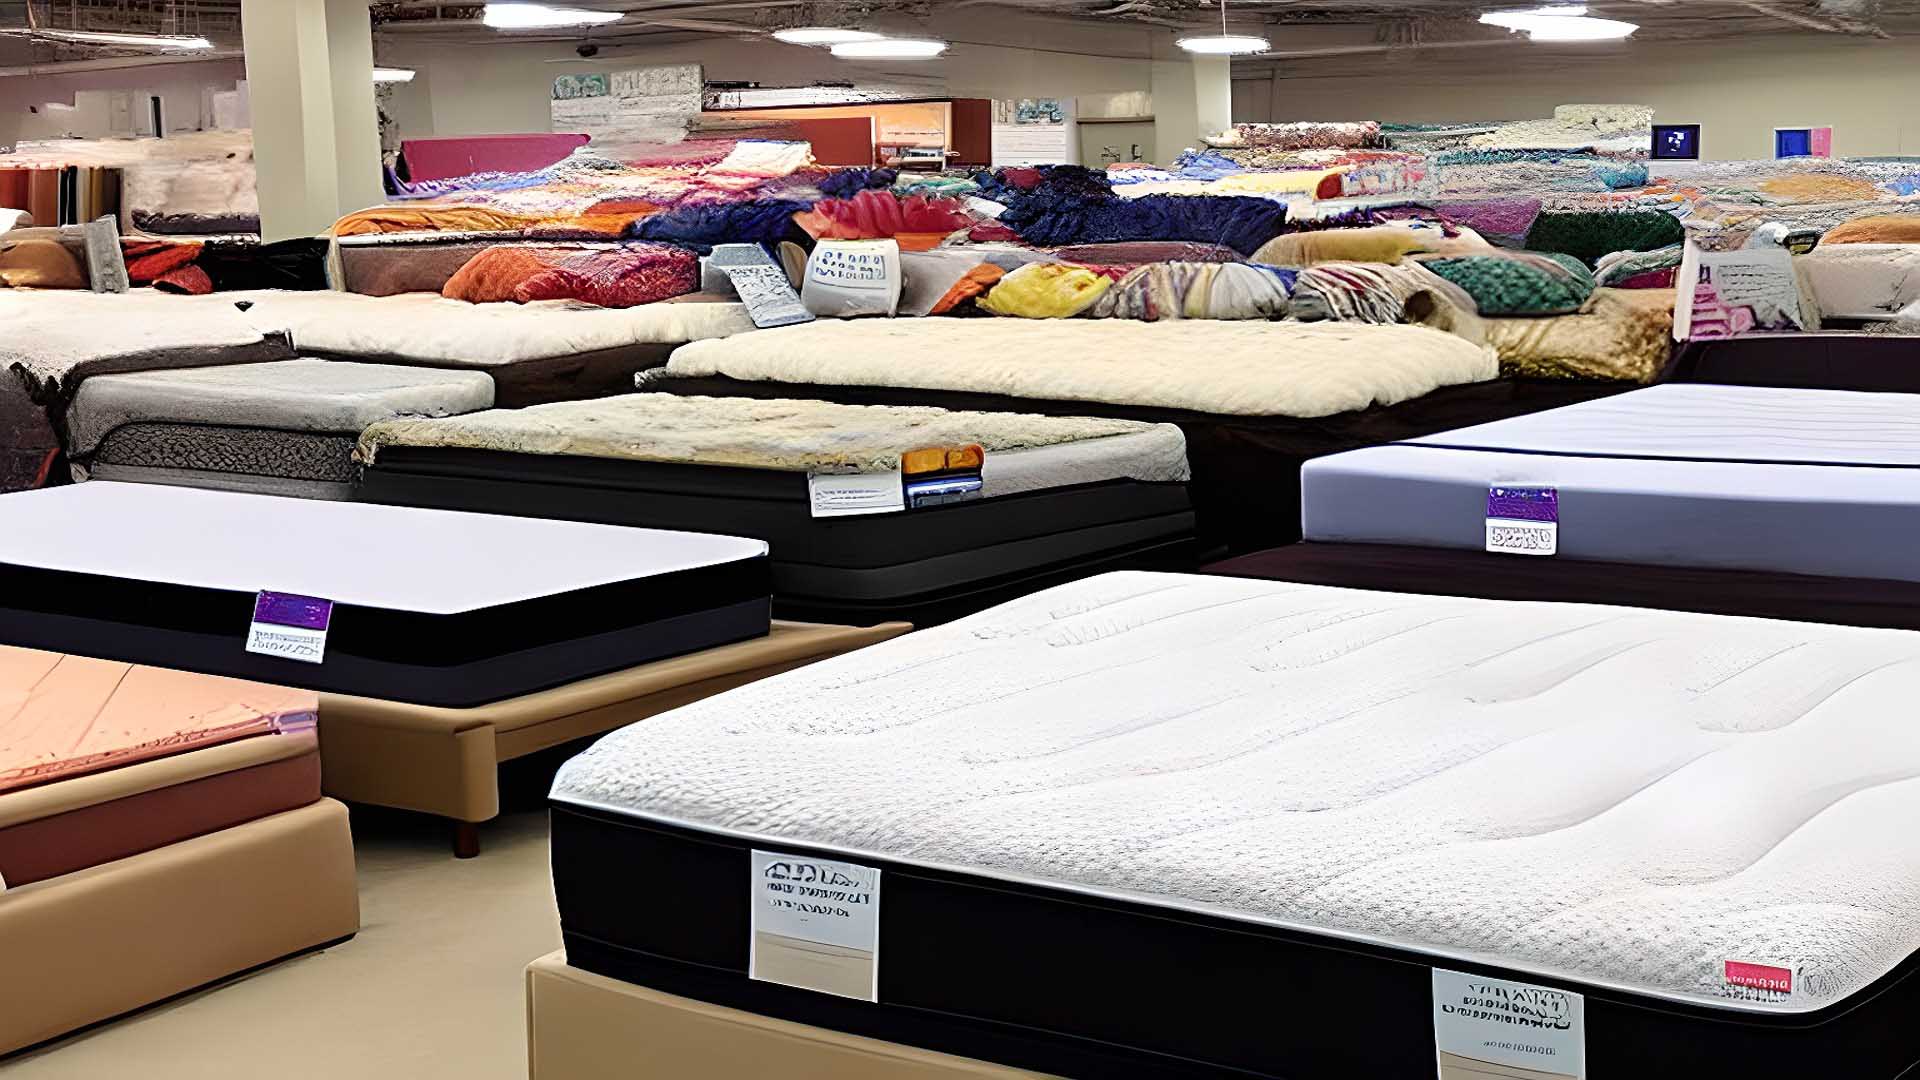 Mattress Sale in Fort Myers, Florida